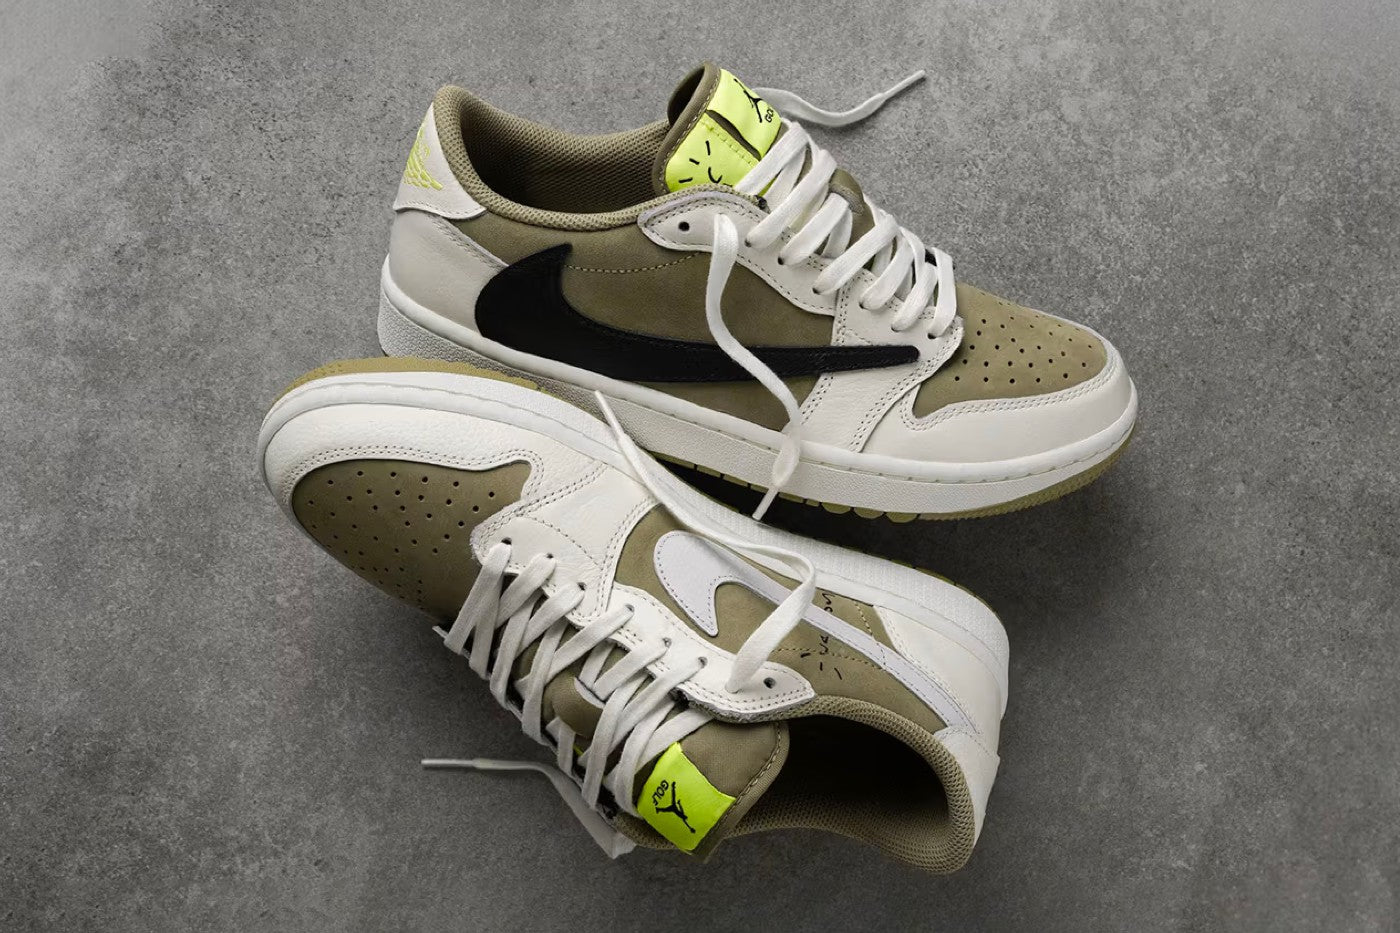 The Travis Scott x Air Jordan 1 Low OG Golf "Neutral Olive" is Available Here!